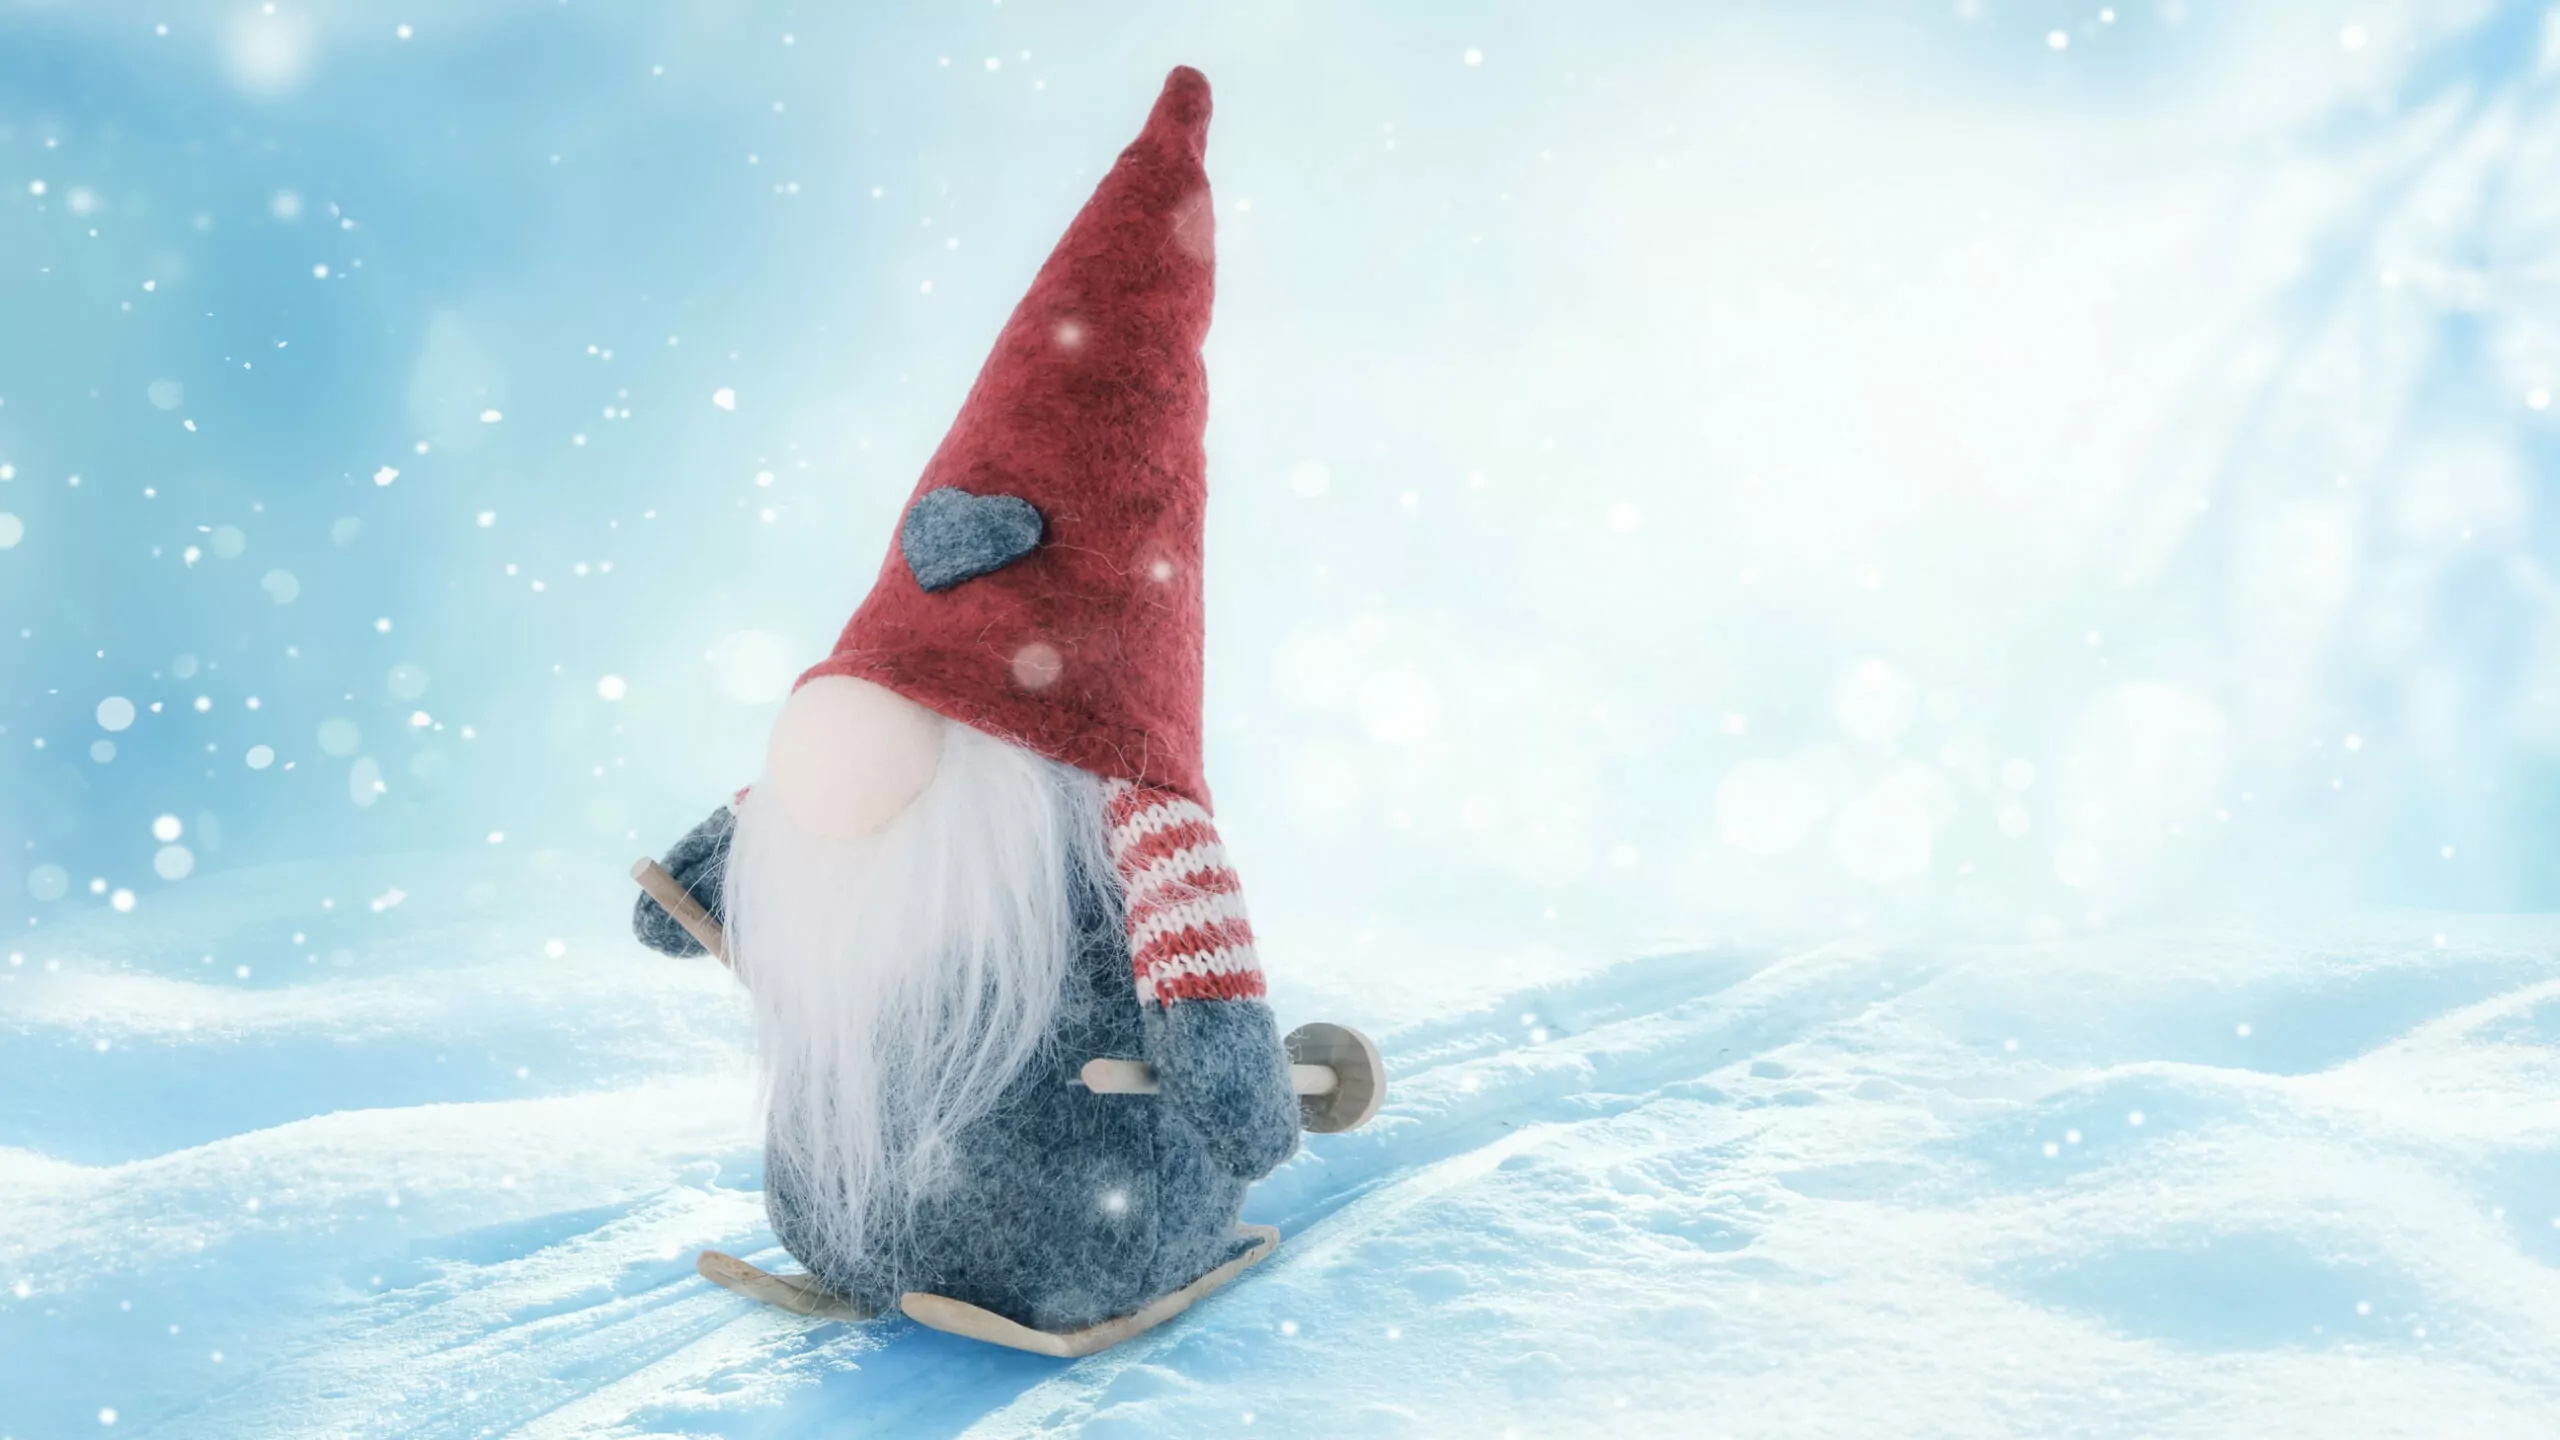 Gnome greetings, Friendly garden gnome, Welcoming presence, Charming decoration, 2560x1440 HD Desktop